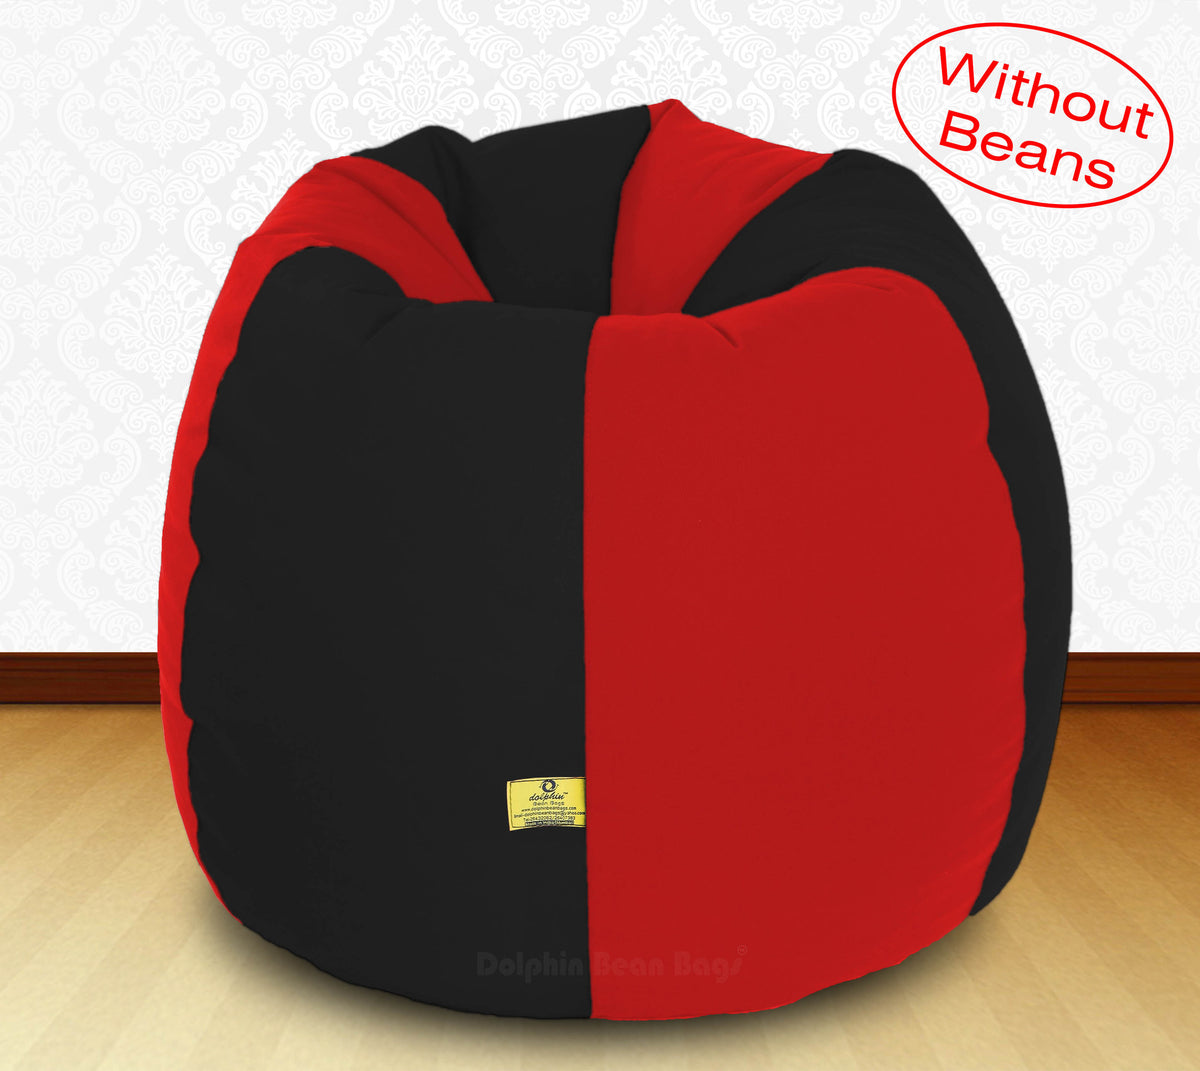 DOLPHIN XXXL BEAN BAG-RED-COVER (Without Beans) – Dolphin Bean Bags